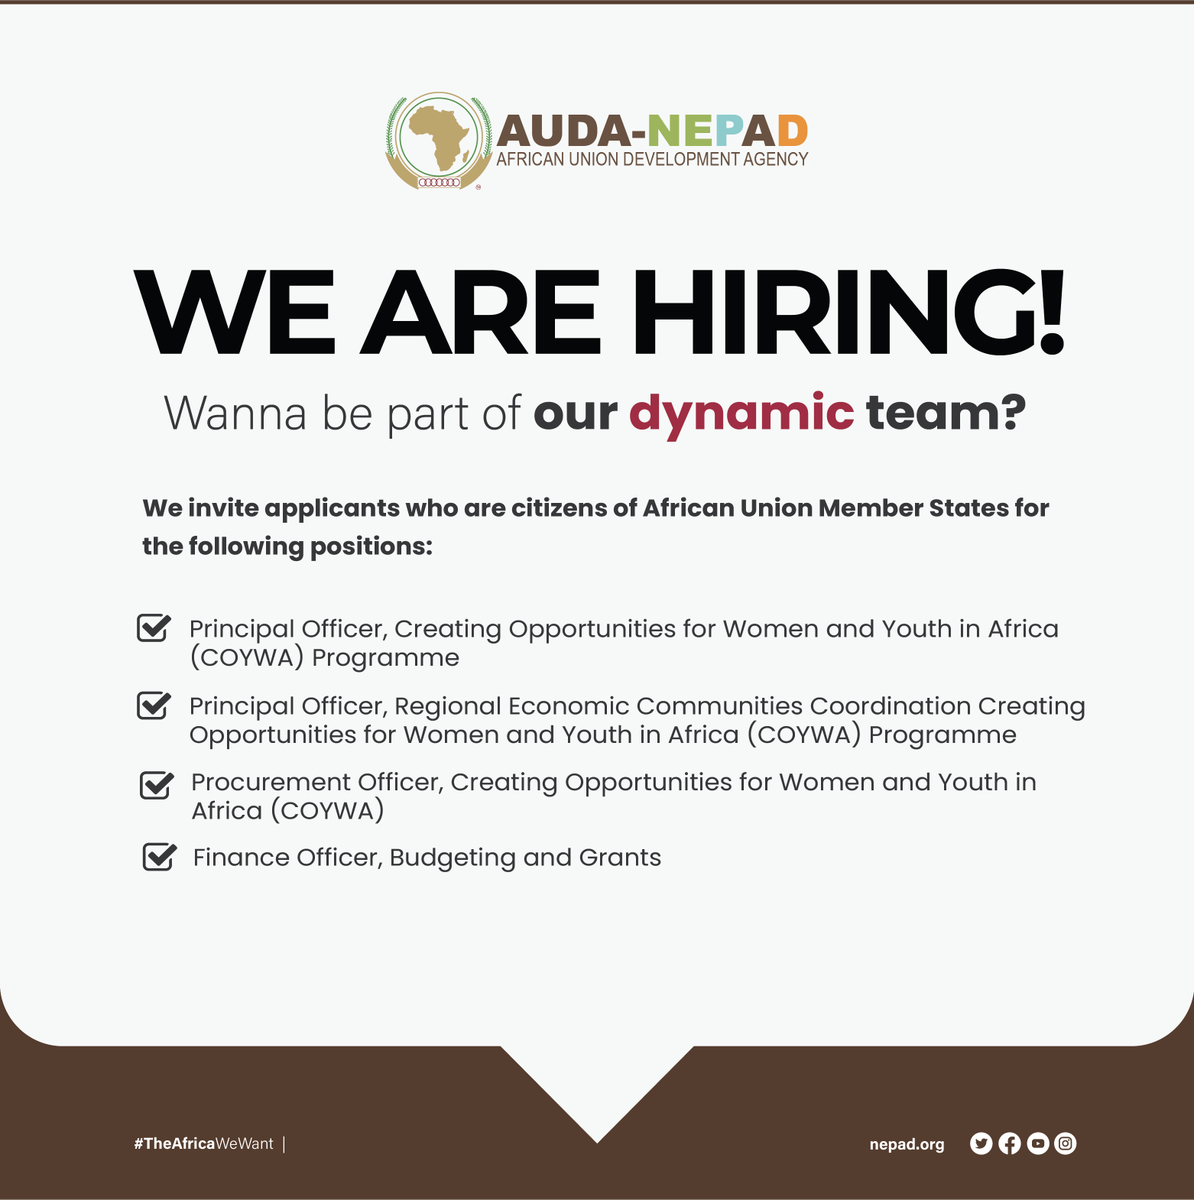 Wanna be part of our dynamic team? We are pleased to extend an invitation to citizens of @_AfricanUnion Member States to apply for the diverse positions currently advertised on our website: nepad.org/work-with-us/c…